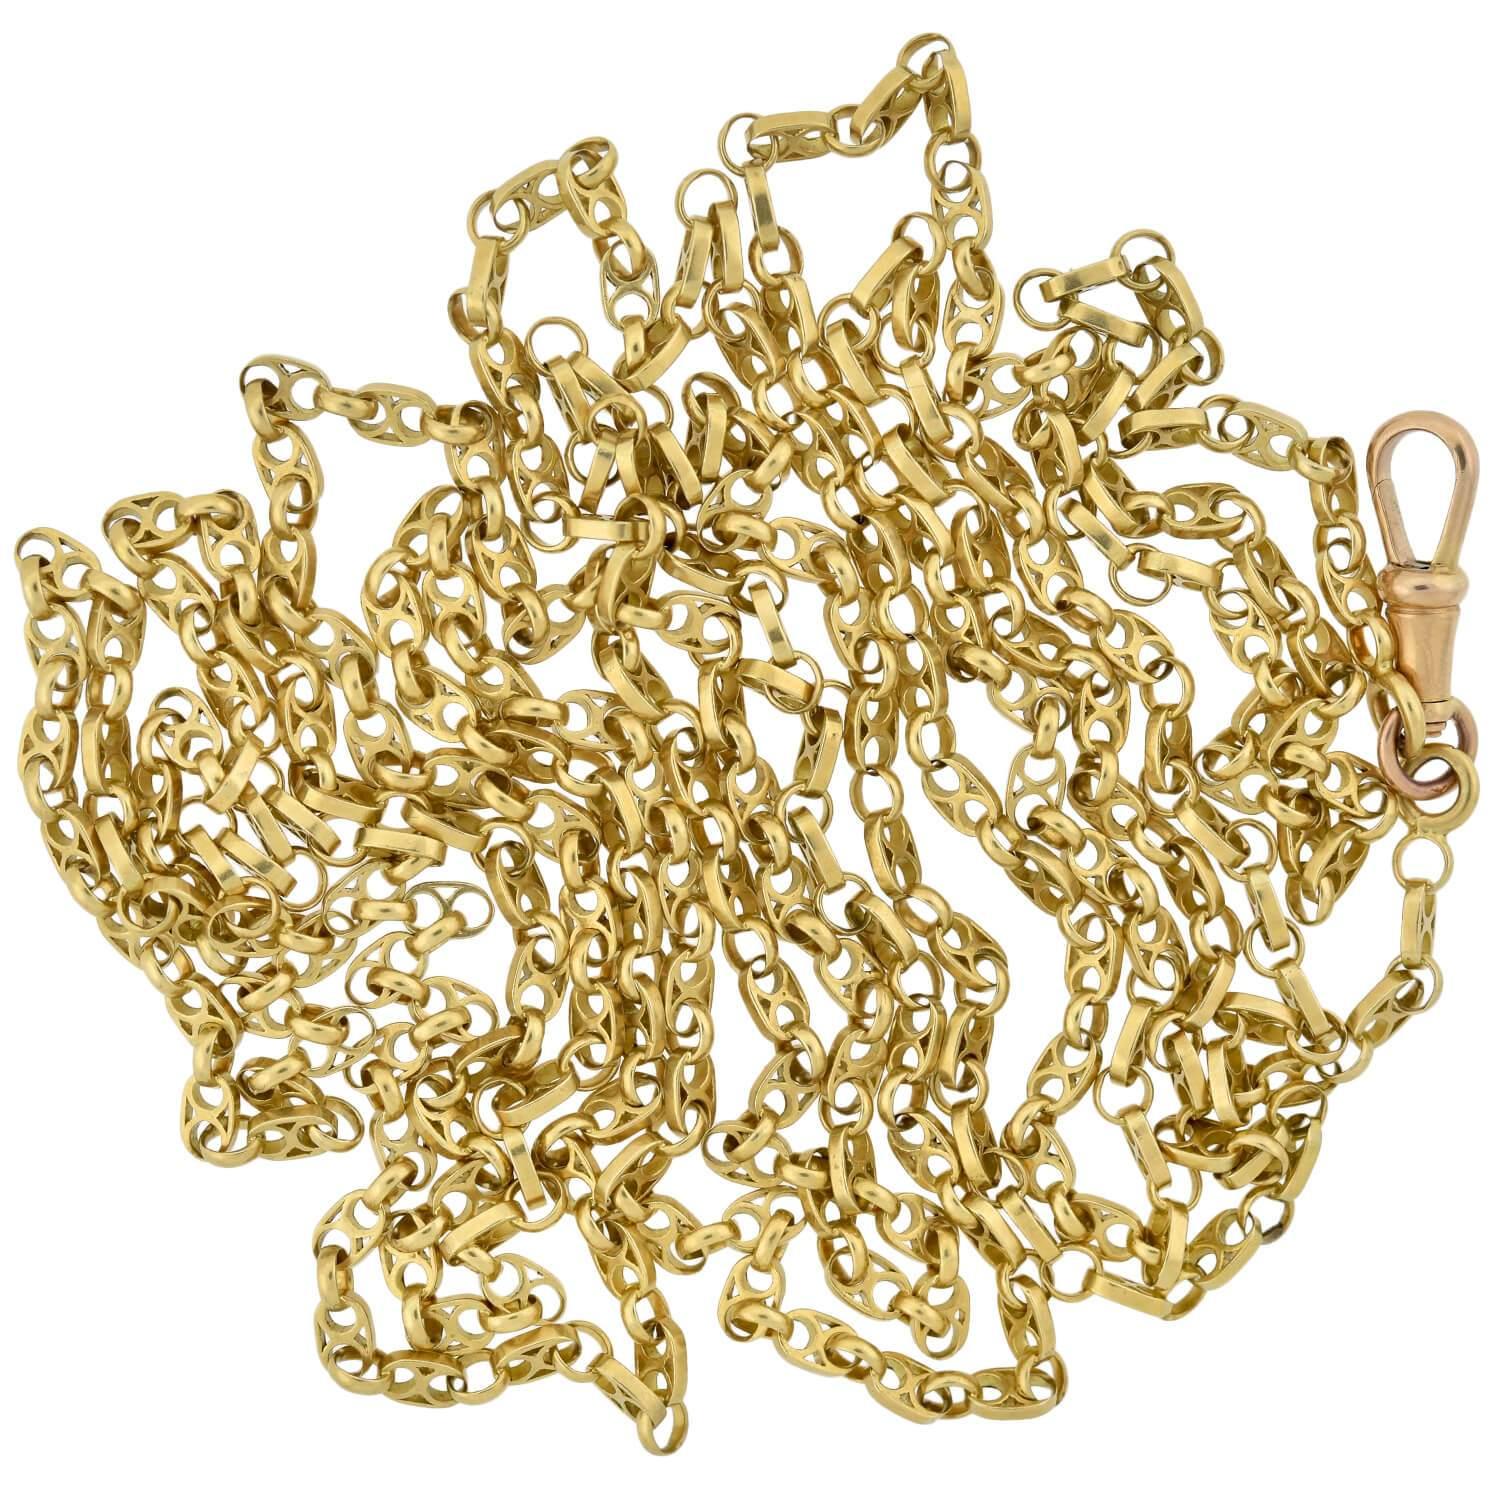 An absolutely fabulous gold watch chain from the Victorian (1880s) era! Extremely long in length, this wonderful French-made piece is comprised of elegant 18kt yellow gold links, which have a beautiful anchor-link style design. Oval links,